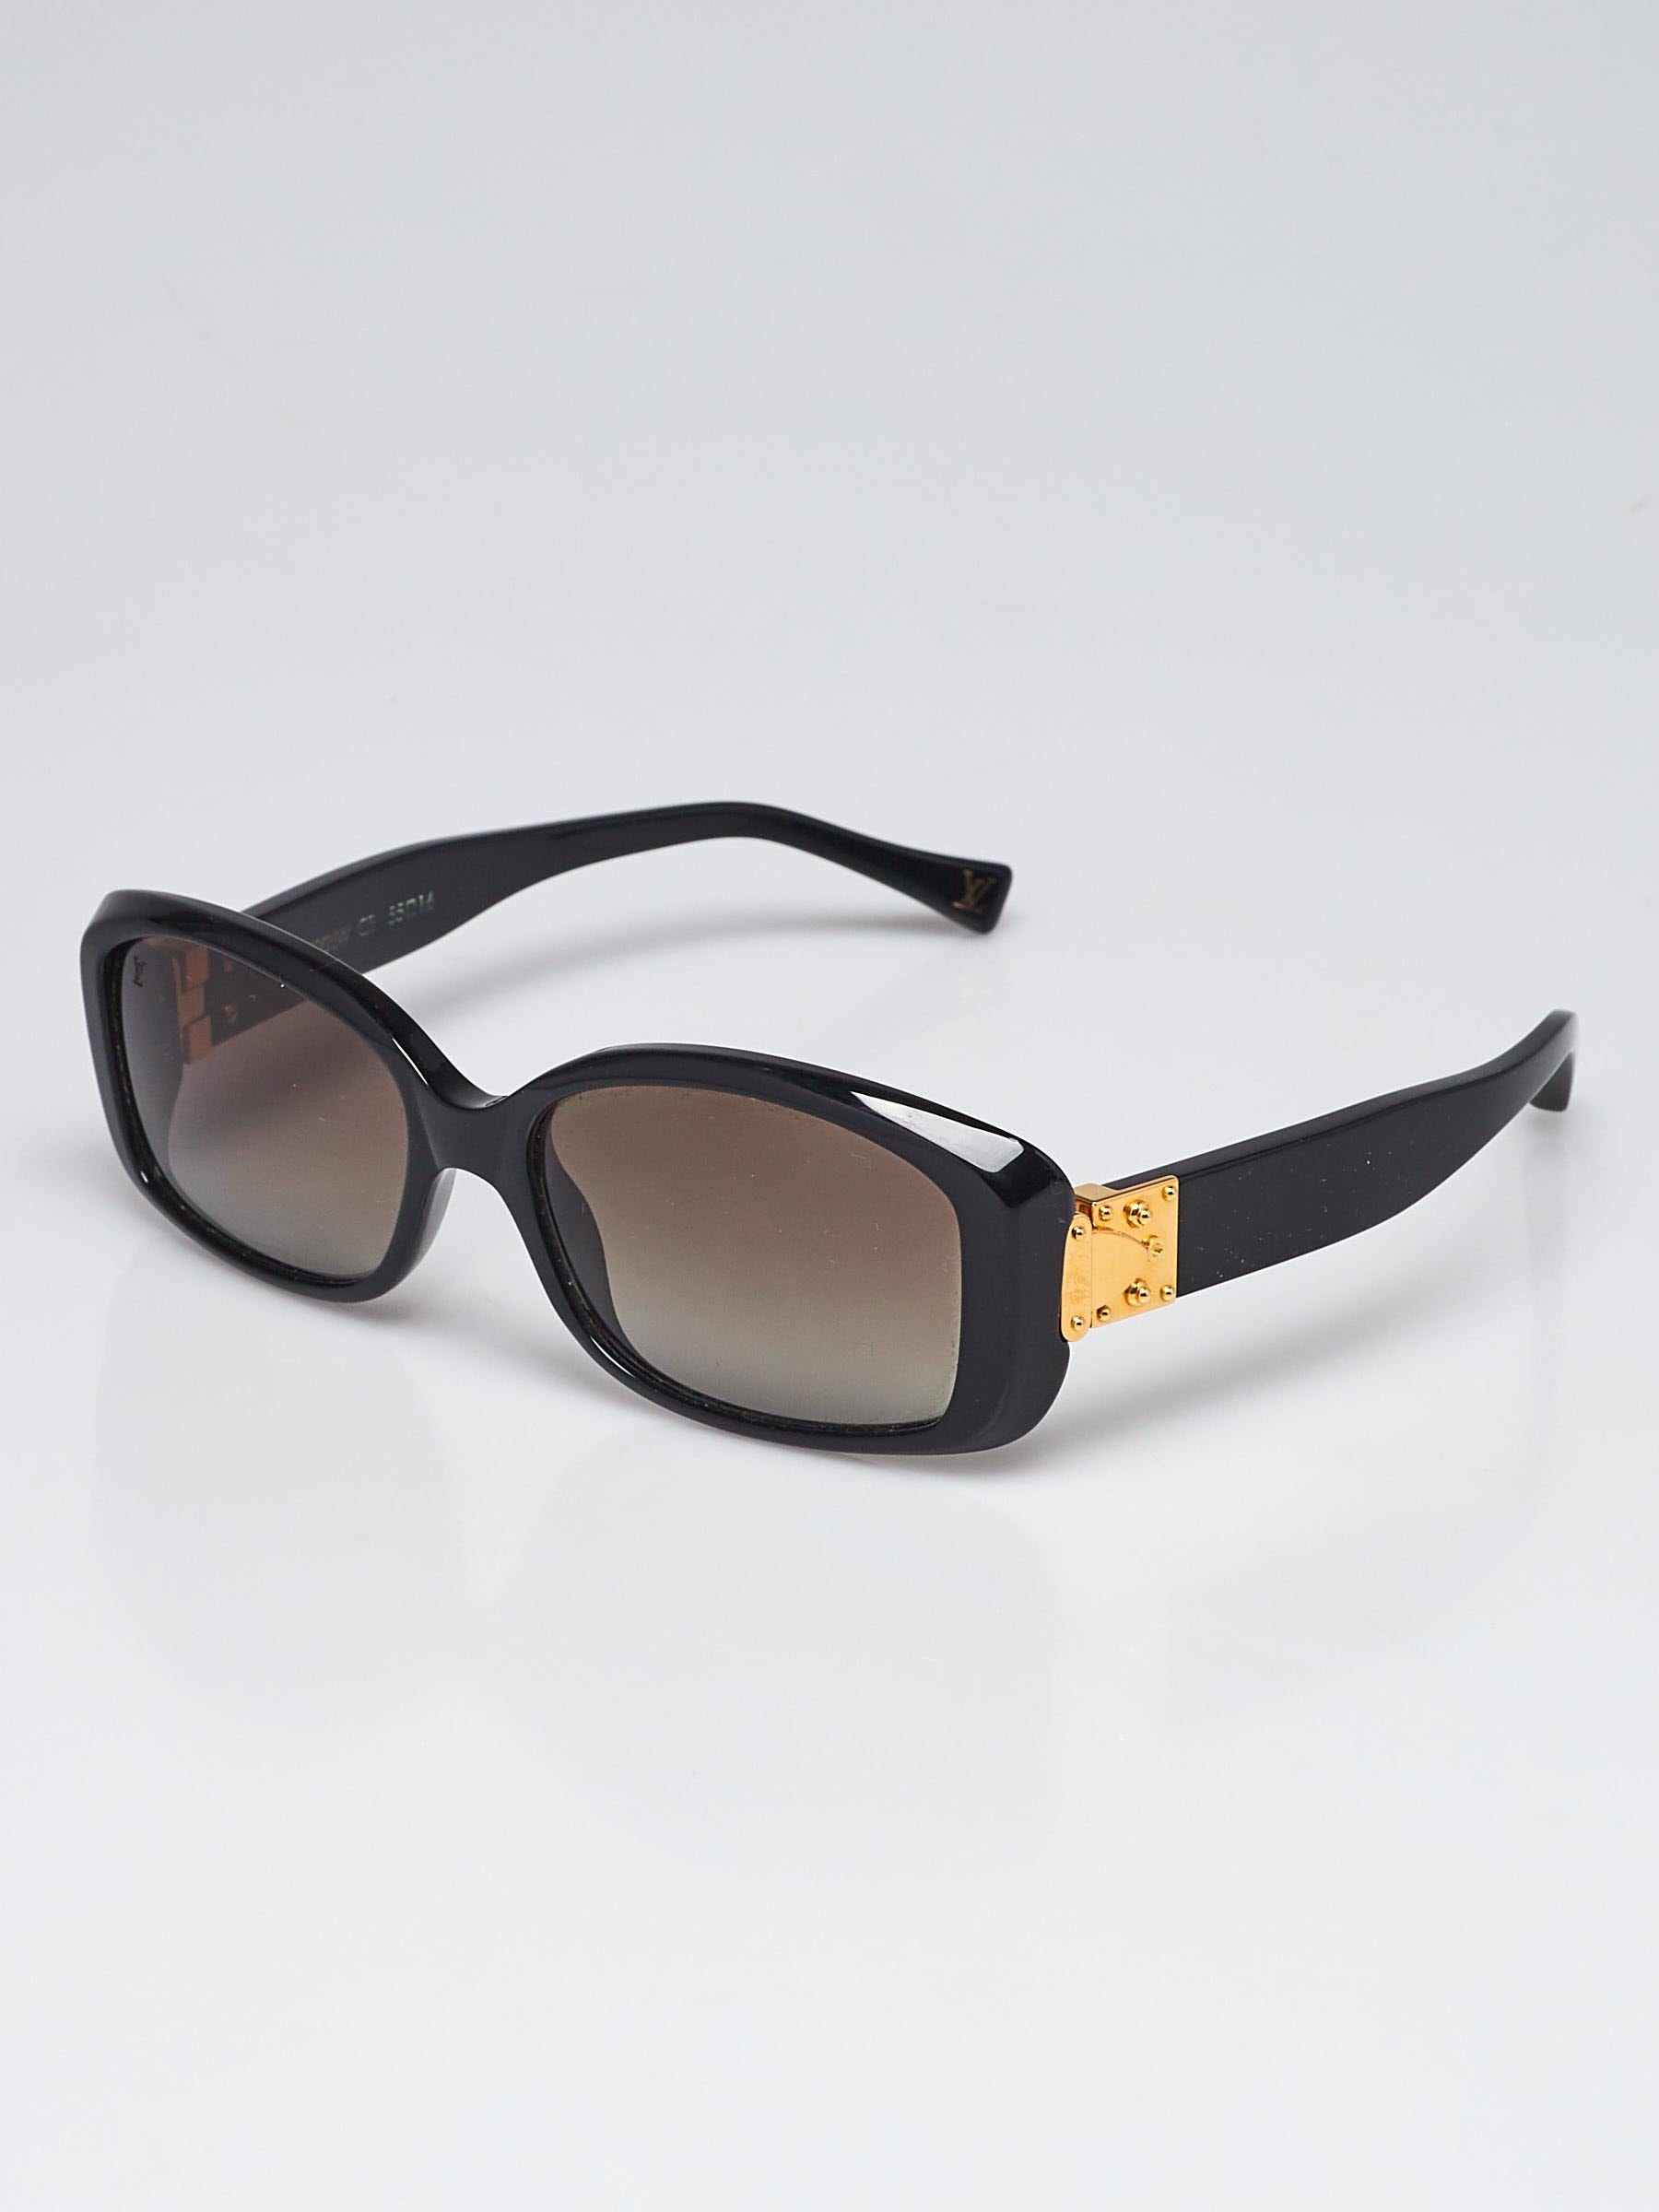 Louis Vuitton - Authenticated Sunglasses - Plastic Black For Man, Very Good condition